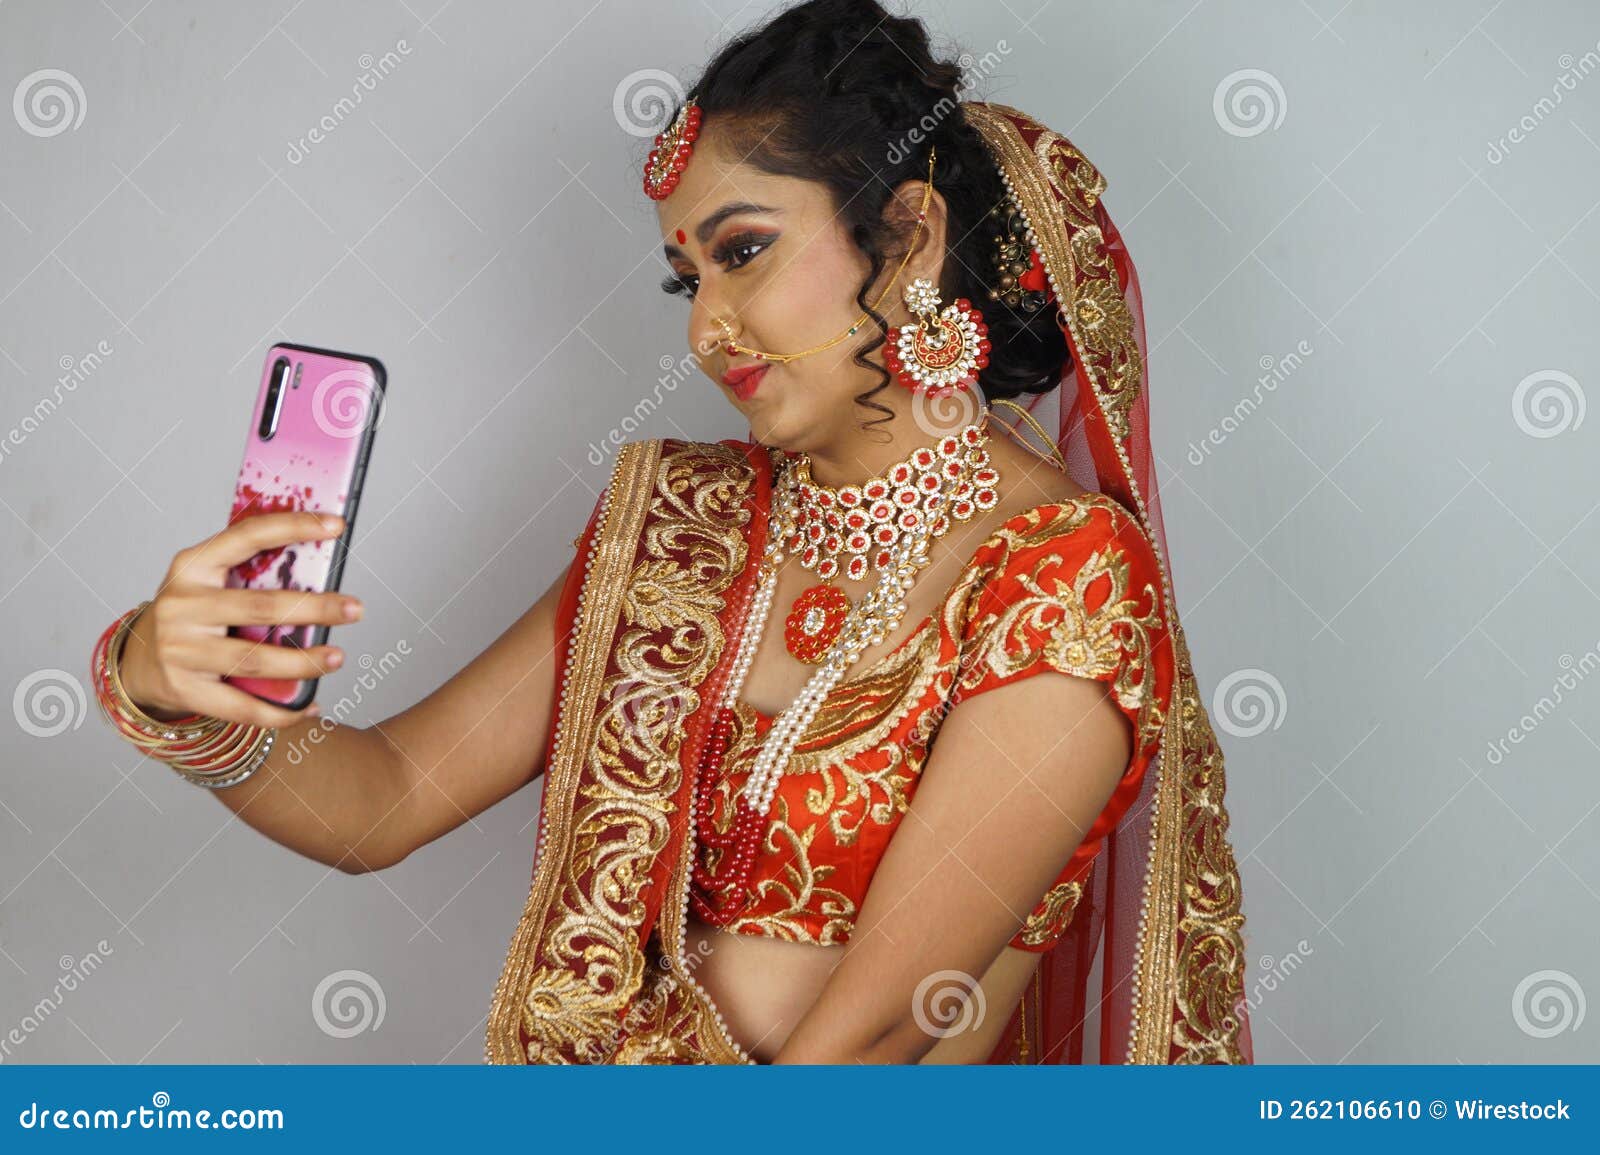 Best Bengali Bridal Makeup Artists in Sarjapur with Prices